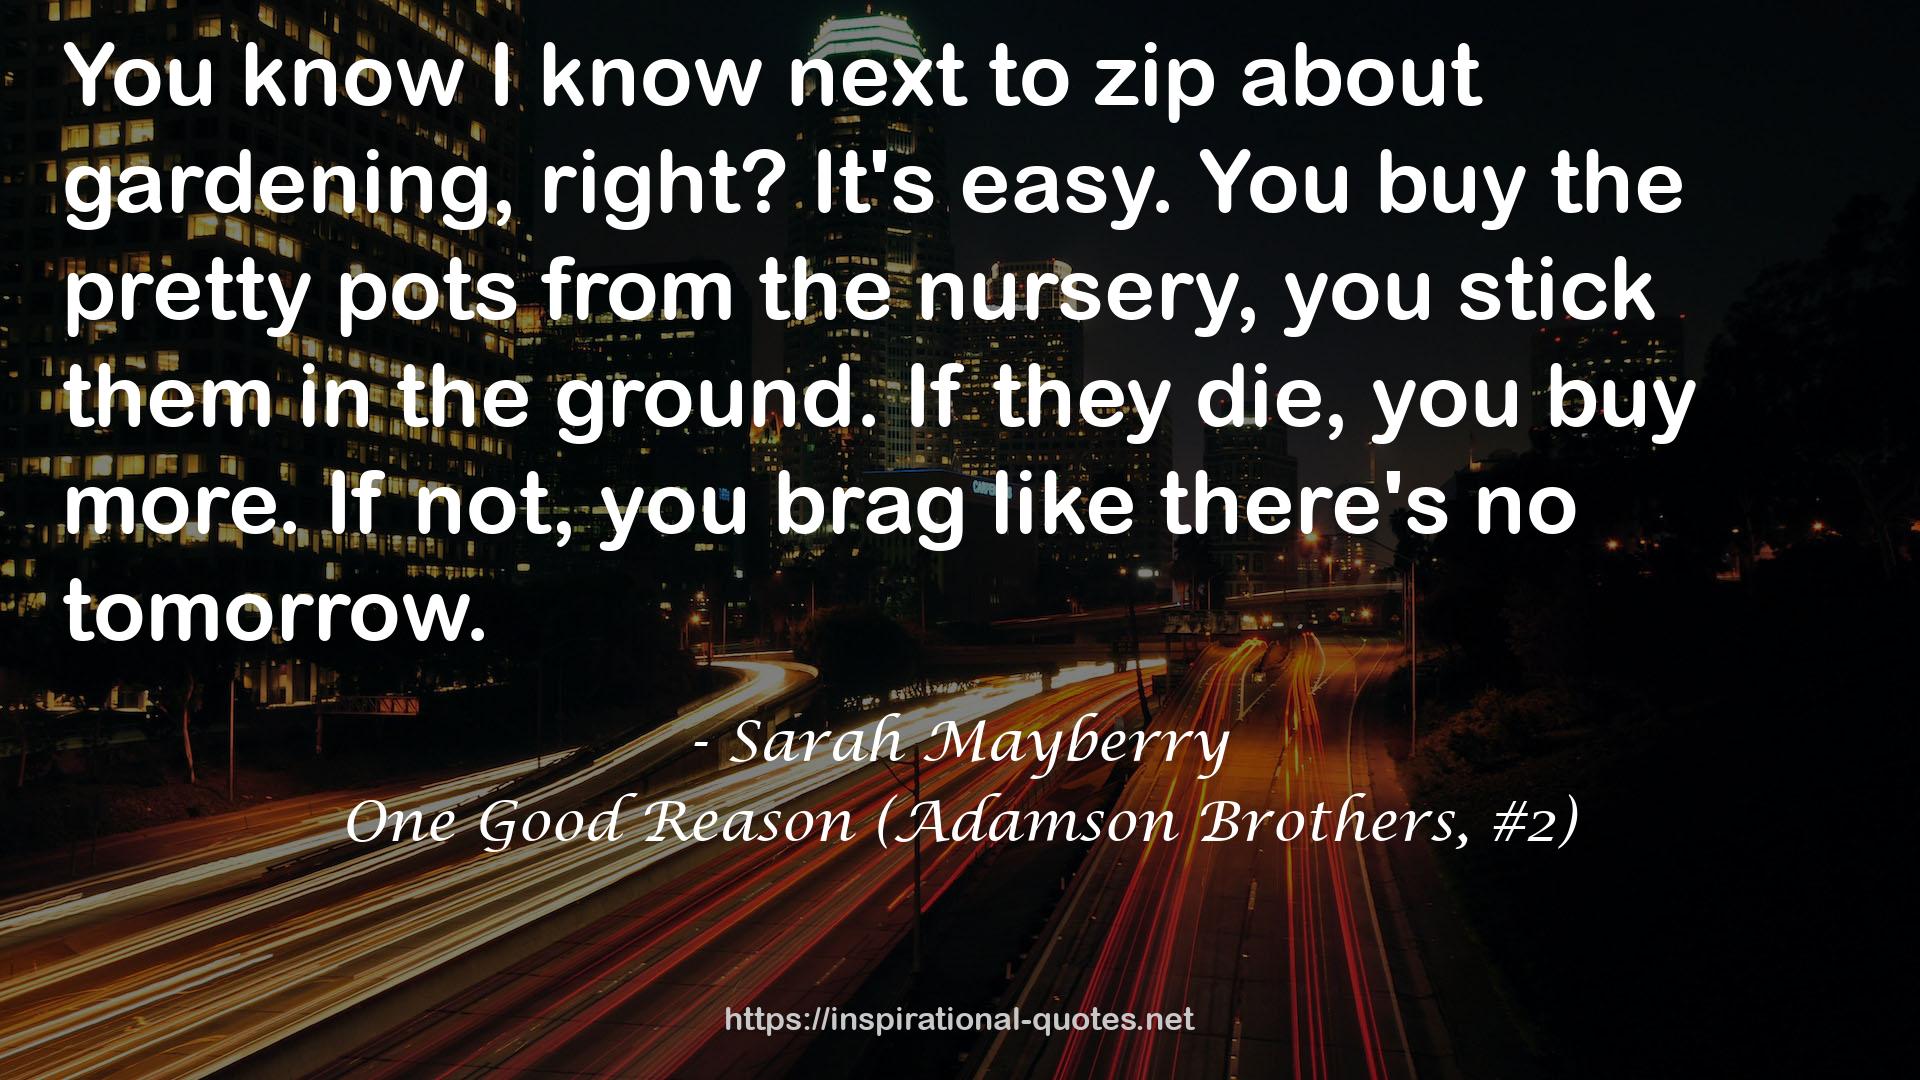 One Good Reason (Adamson Brothers, #2) QUOTES